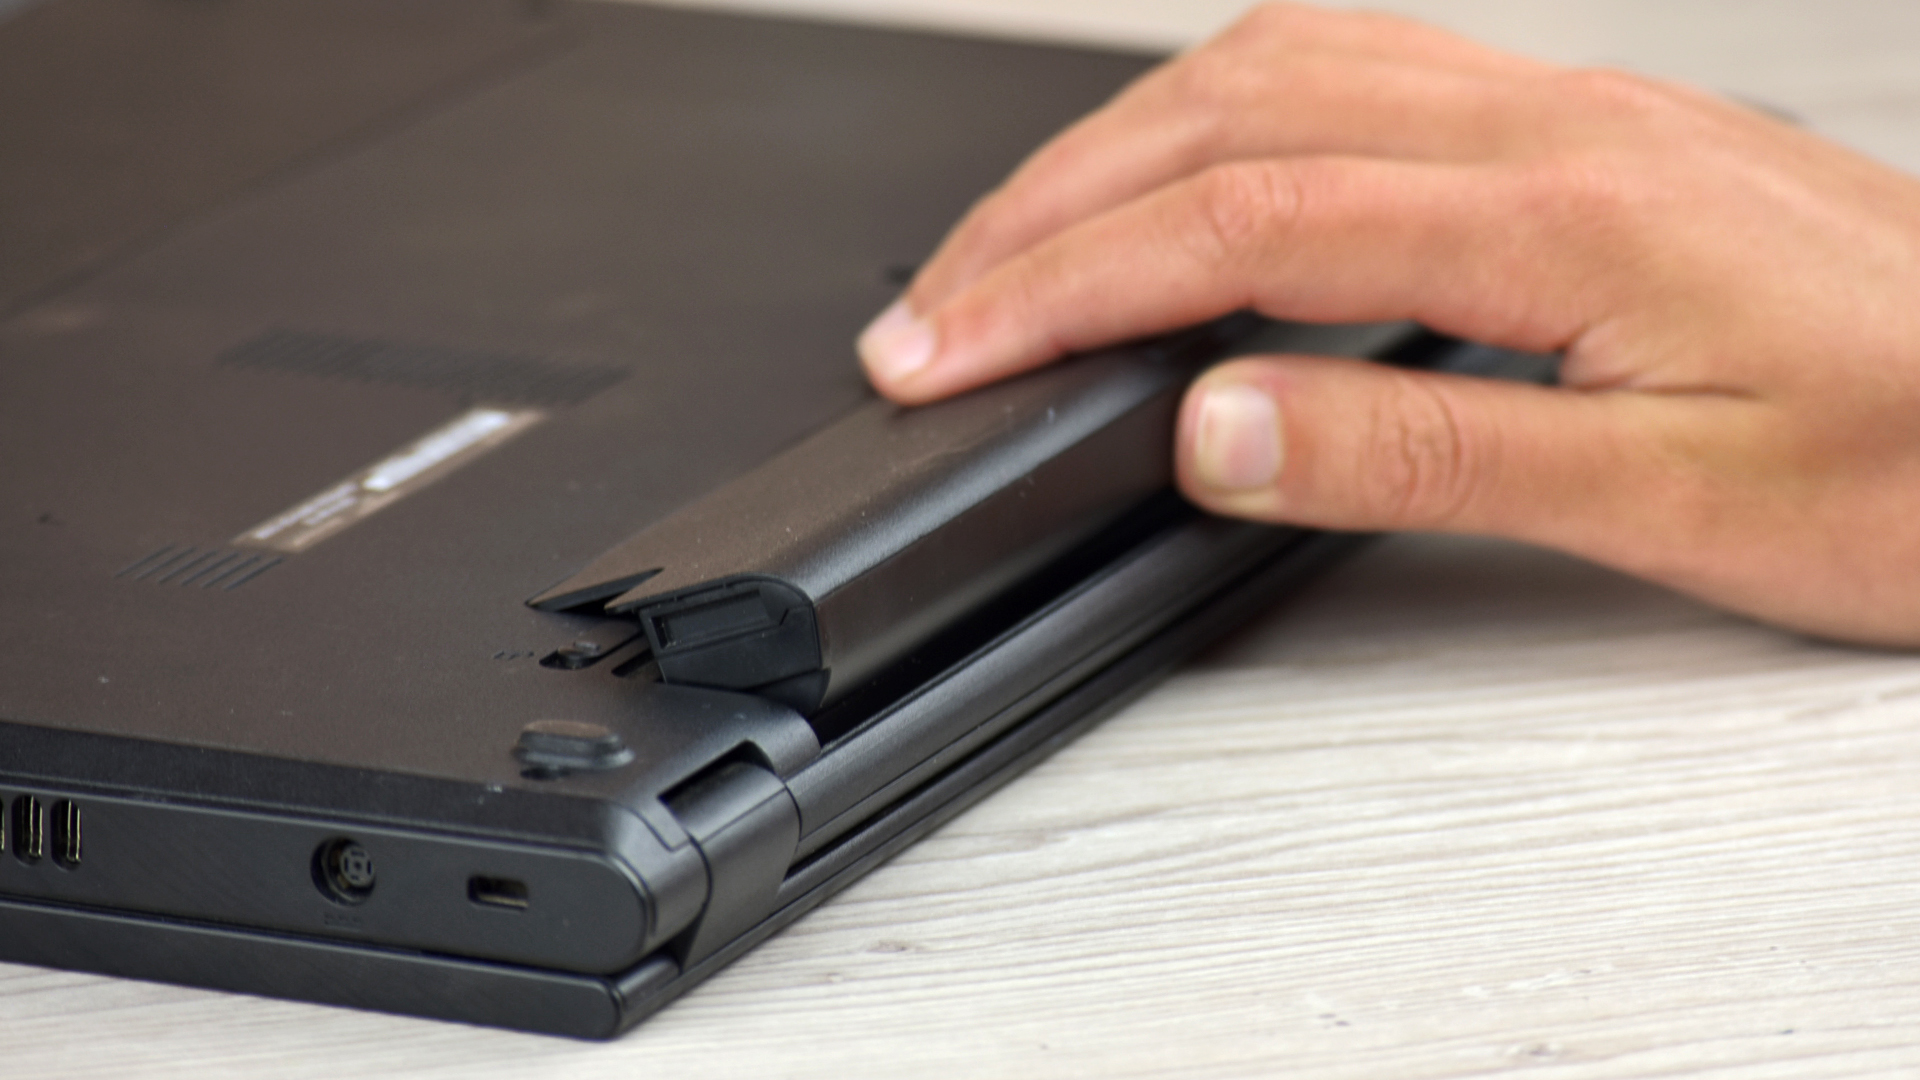 Make sure the battery is properly inserted into the laptop.
Check for any damage to the battery or battery compartment.